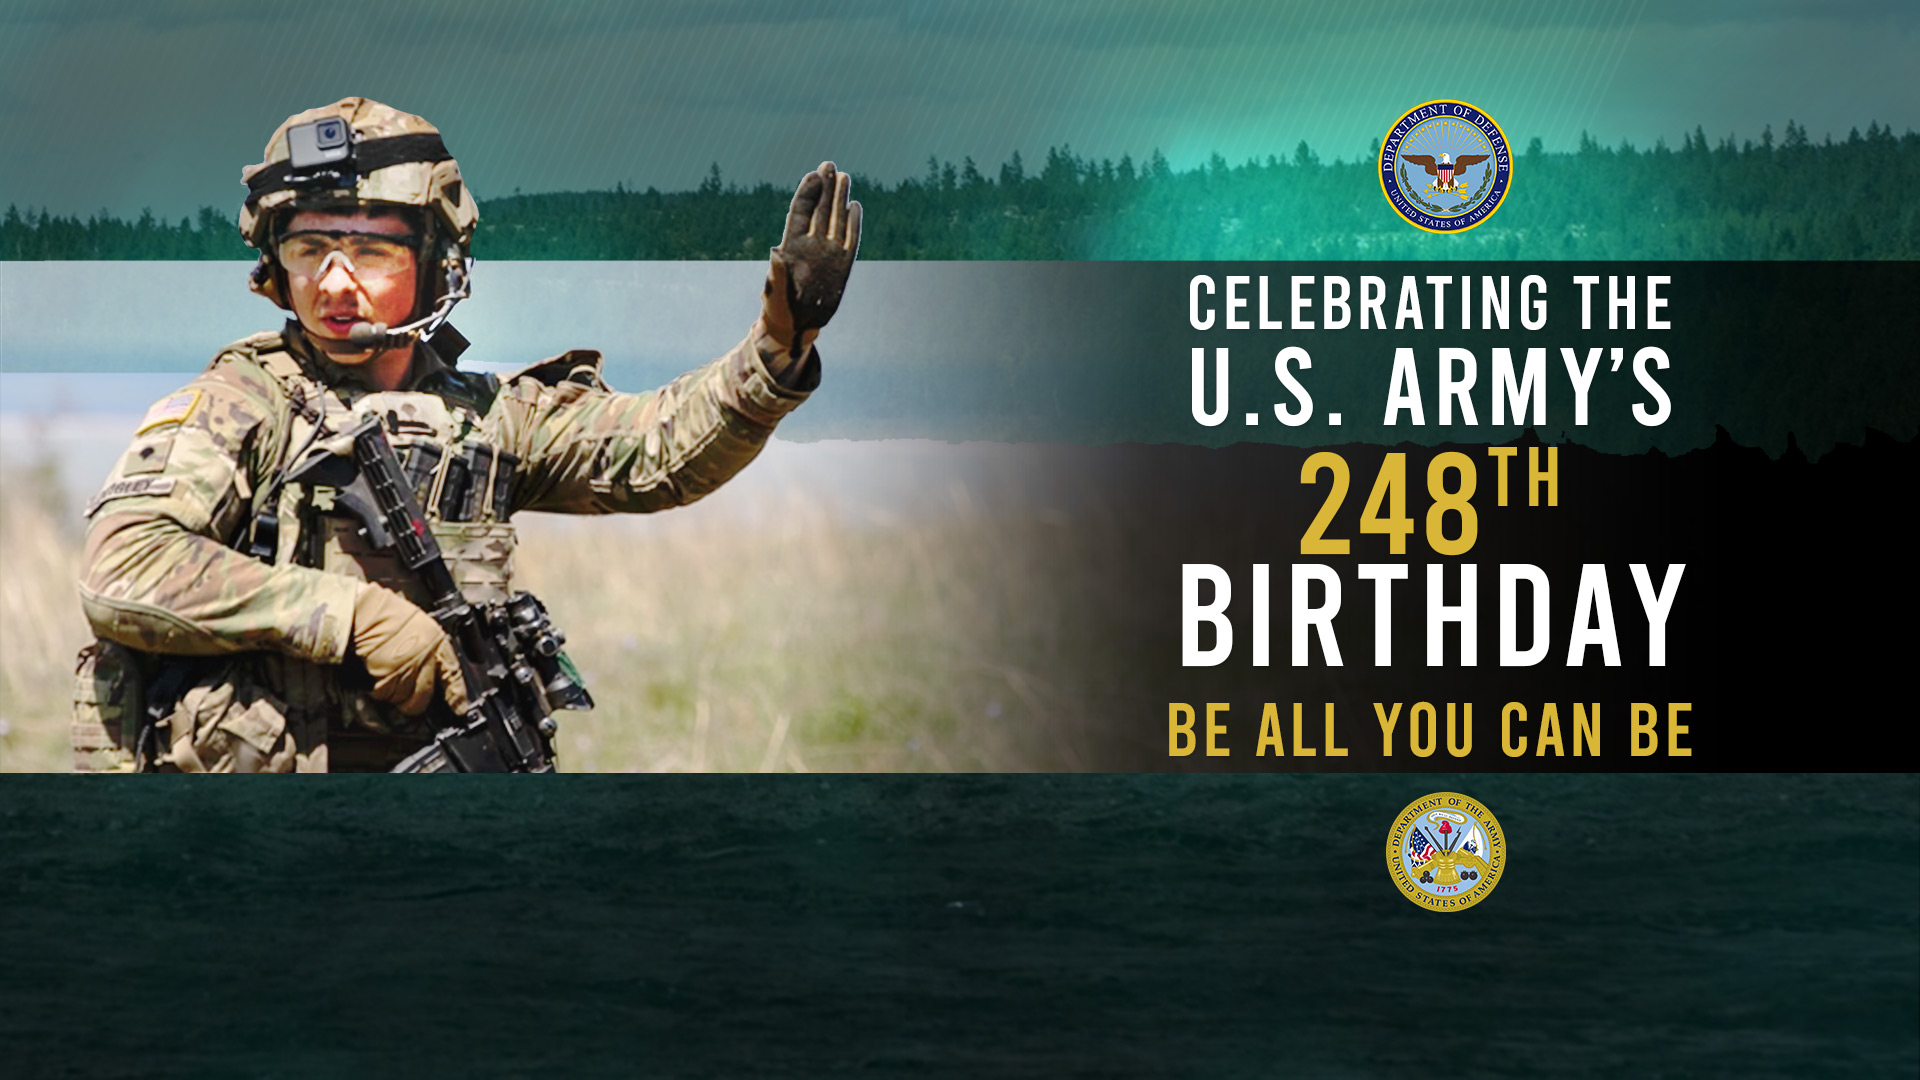 Department of Defense on X: "As we celebrate the 248th birthday of the @USArmy, we remember the remarkable moments that have shaped its illustrious history. The U.S. Army has always risen